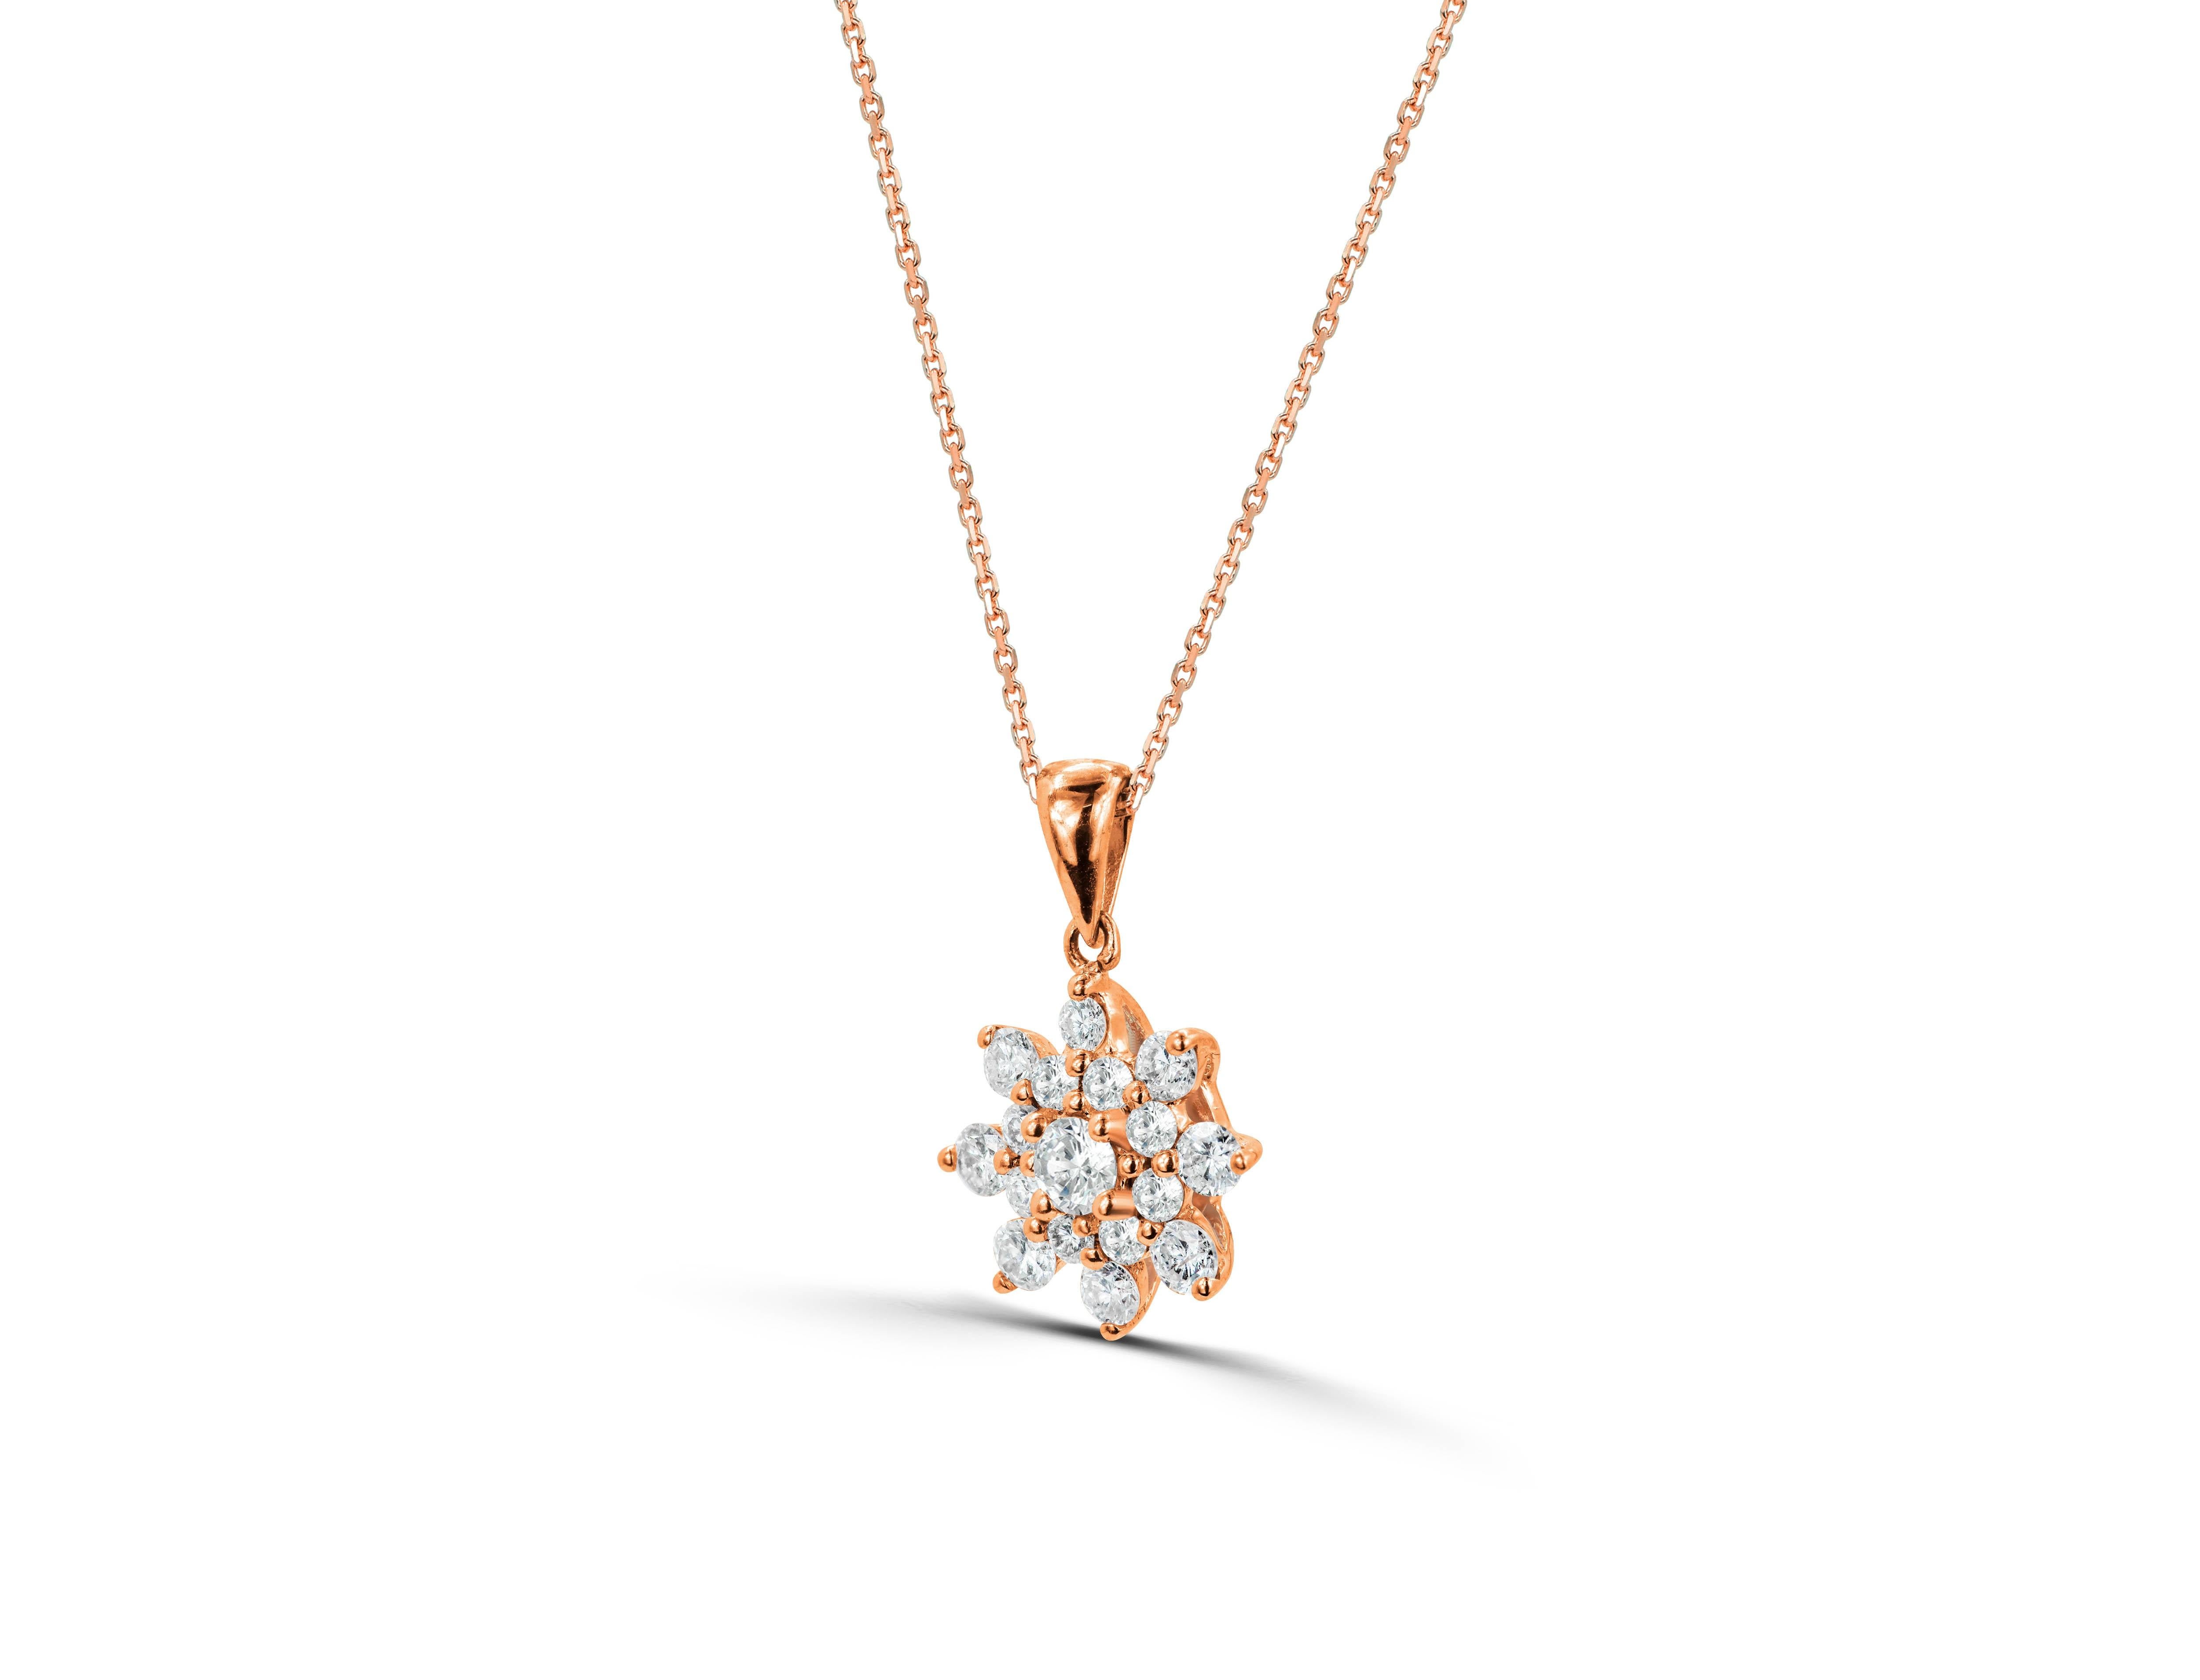 Diamond cluster necklace, Flower cluster necklace, Minimalist necklace, Everyday diamond necklace, beautiful diamond necklace, 18k gold

diamond Flower, Bridal necklace, wedding necklace, diamond pendant, bridesmaid necklace, Wedding jewelry set,